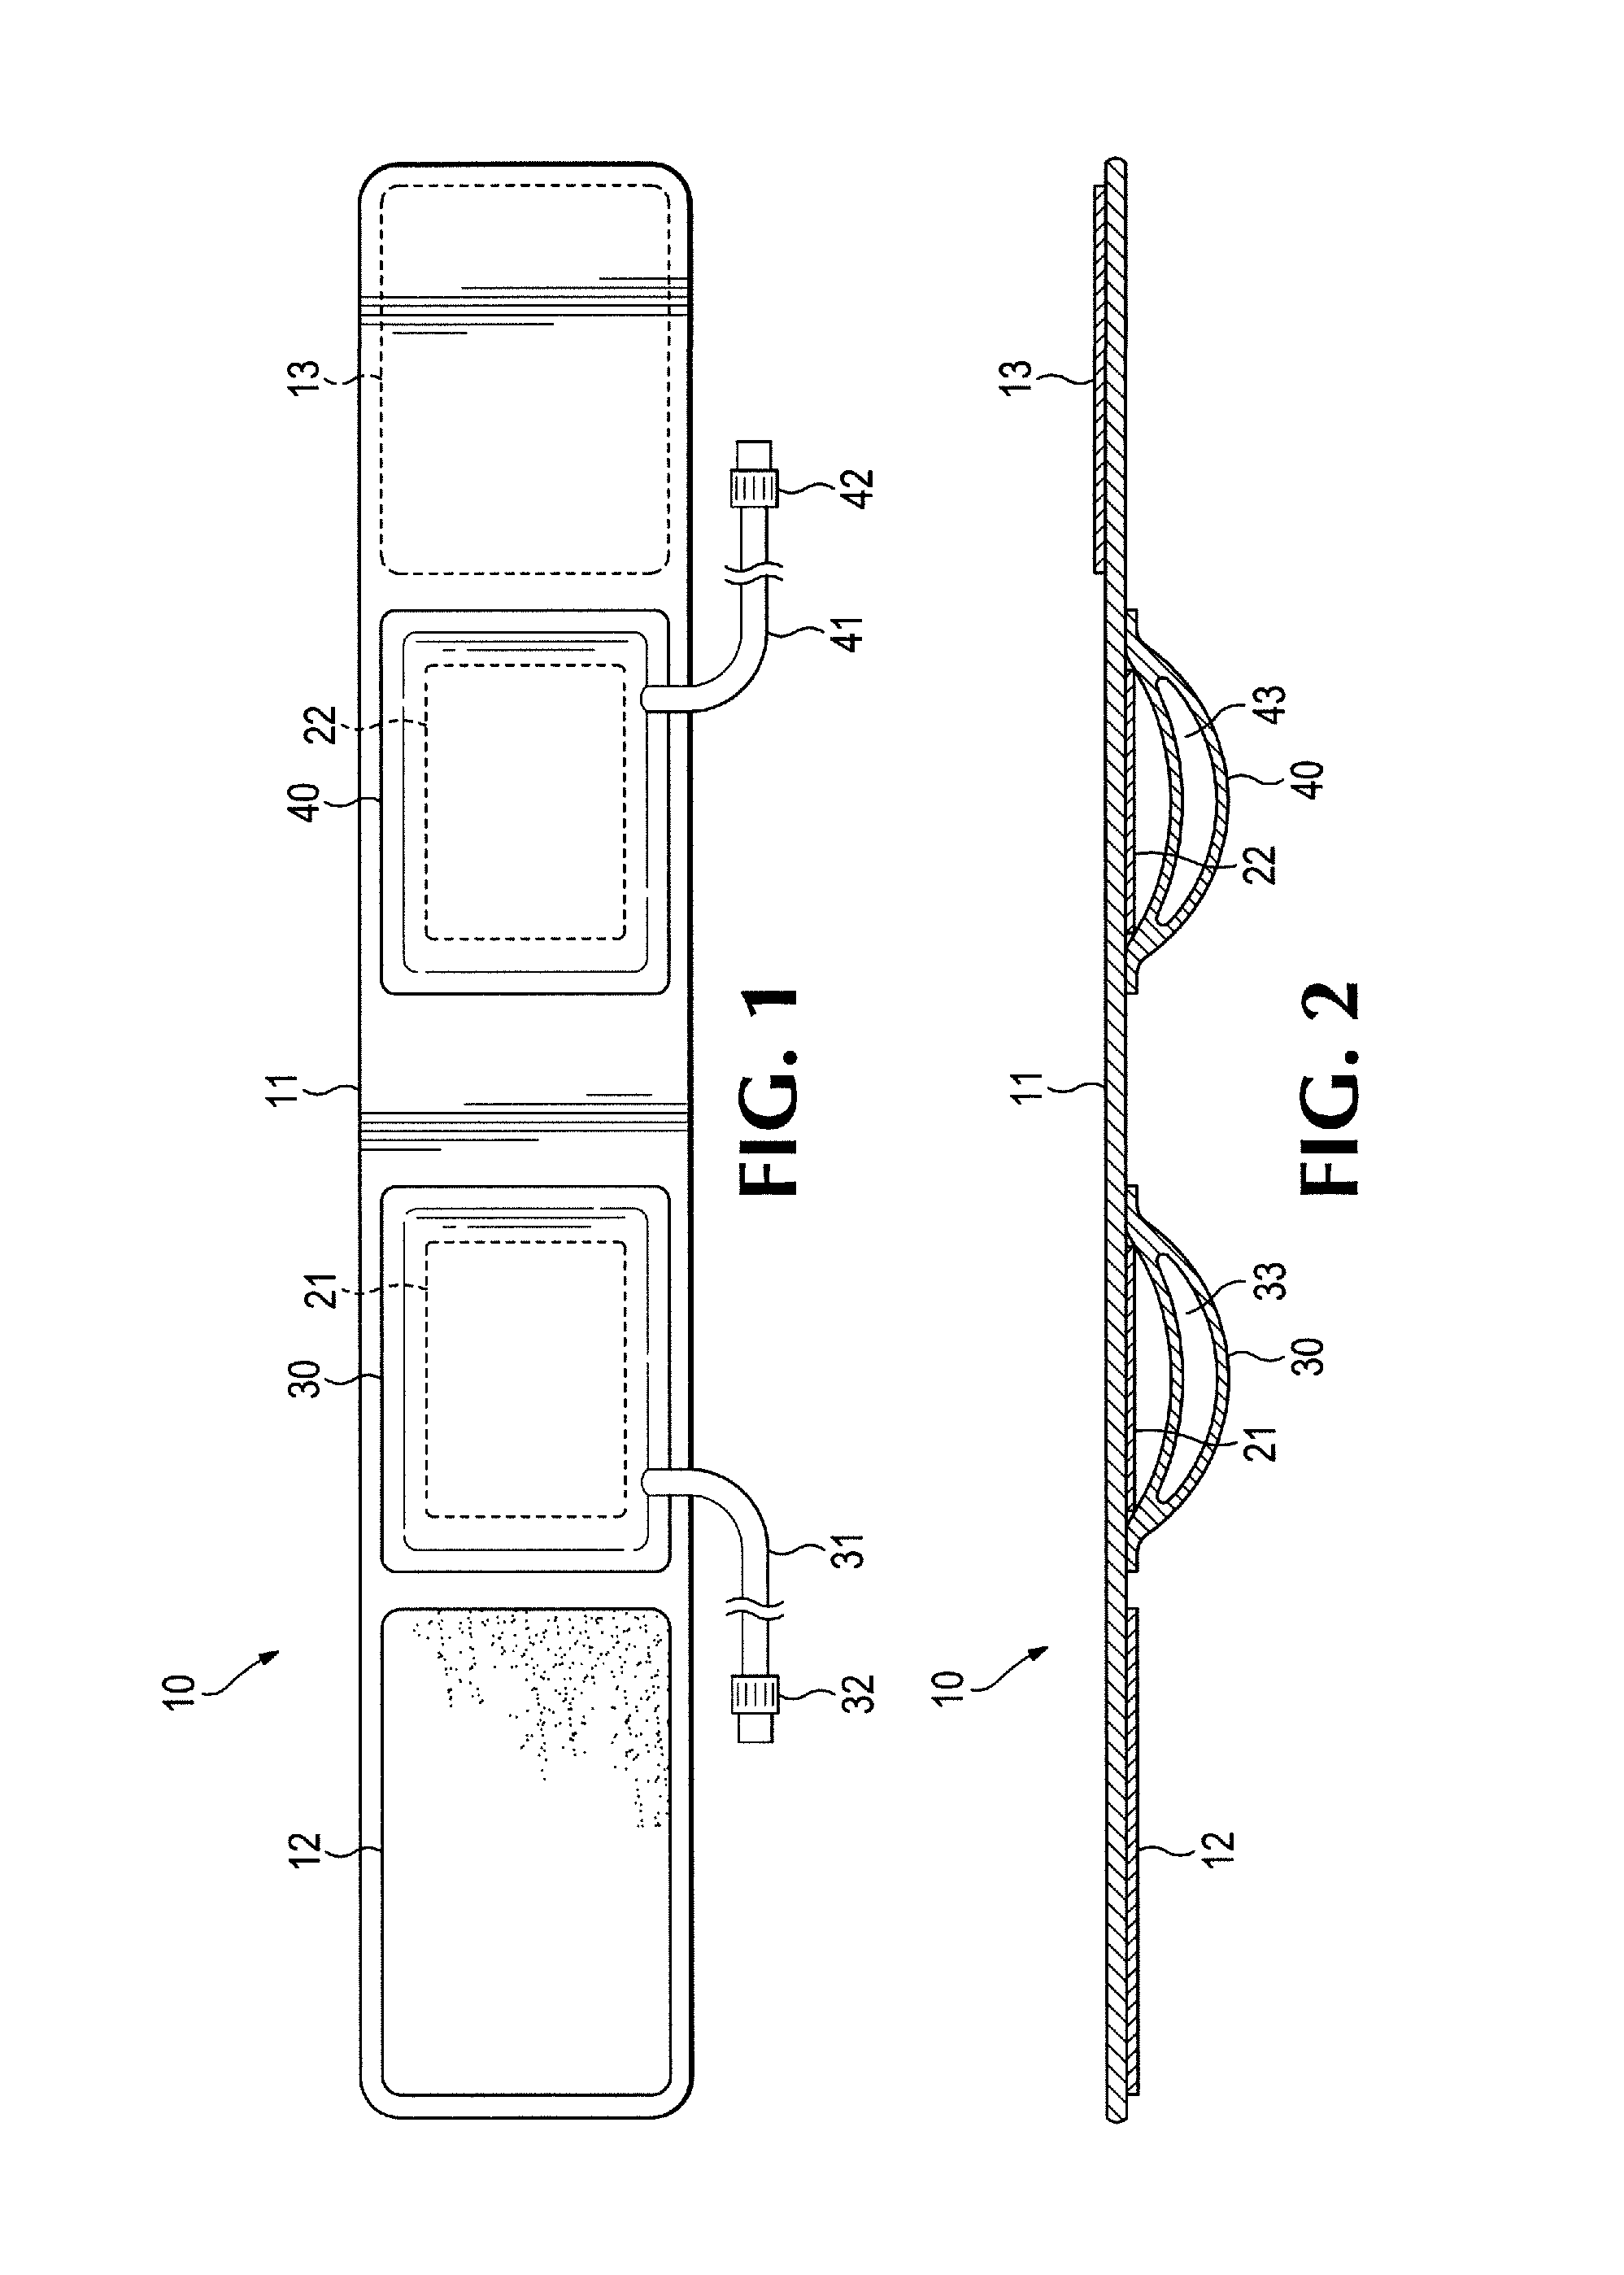 Apparatus and method of use for an adjustable radial and ulnar compression wristband